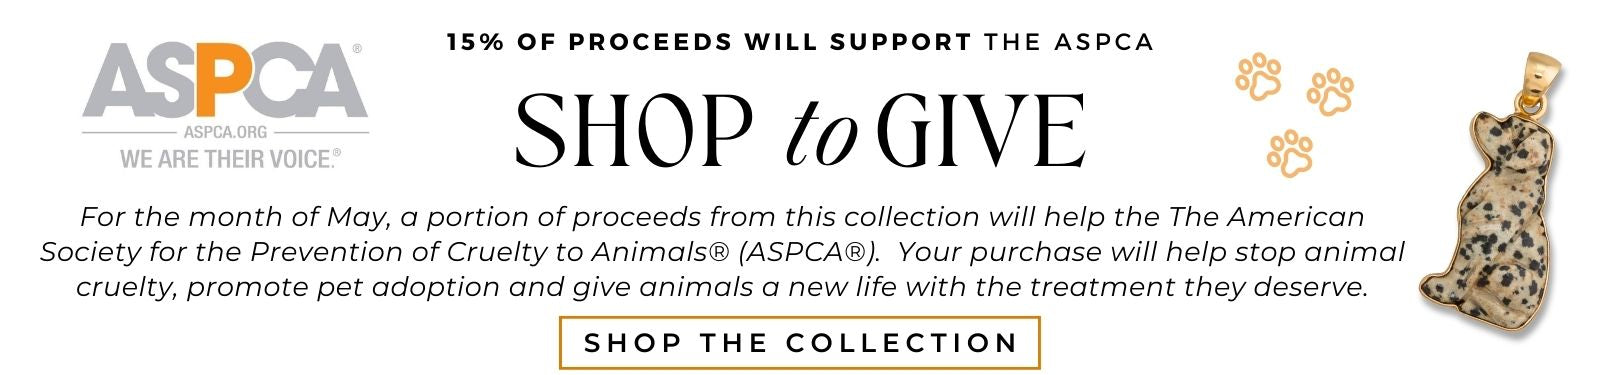 For the month of May, 15% of proceeds from this collection will help the The American Society for the Prevention of Cruelty to Animals® (ASPCA®).  Your purchase will help stop animal cruelty, promote pet adoption and give animals a new life with the treatment they deserve.